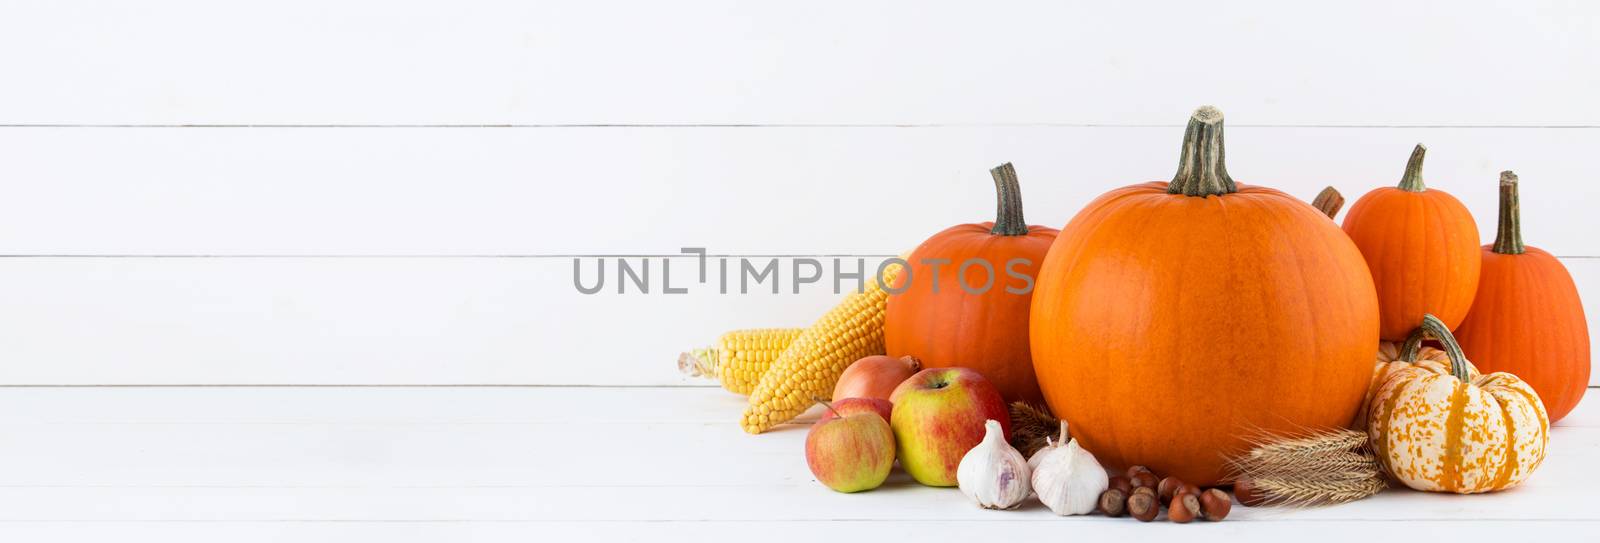 Autumn harvest still life with pumpkins, wheat ears, hazelnuts, garlic, onion, apple and corn on white wooden background